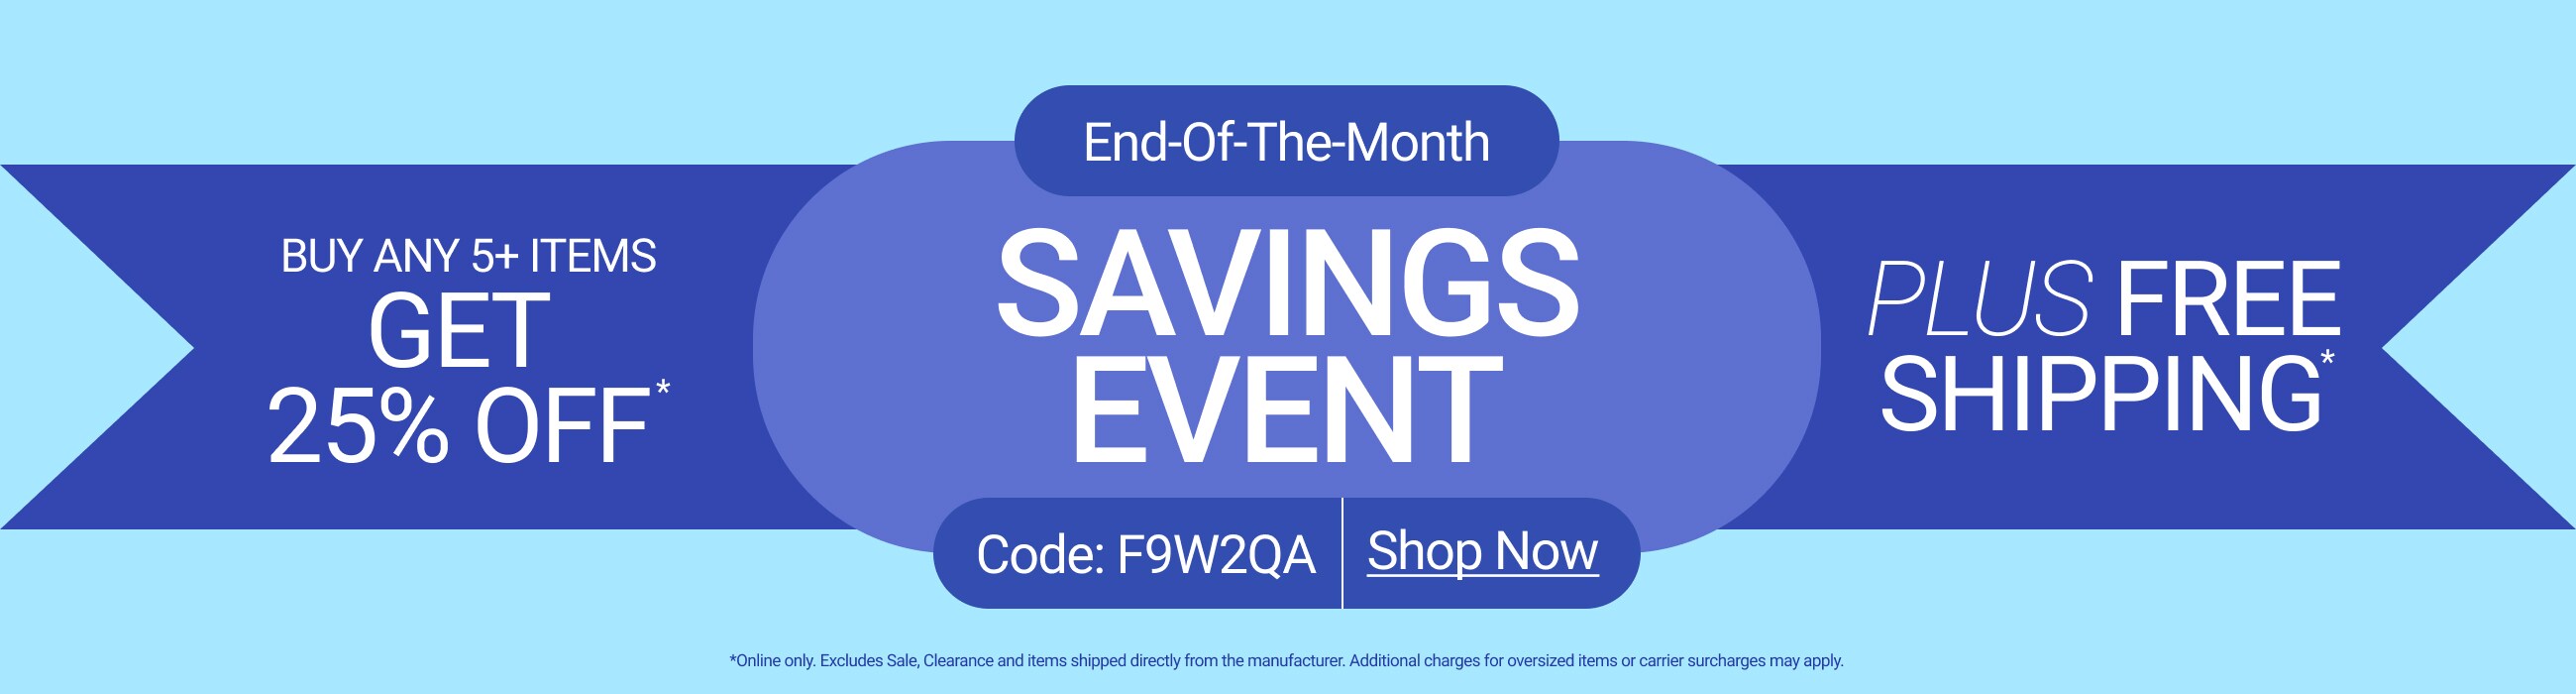 End-of-the-Month Savings Event